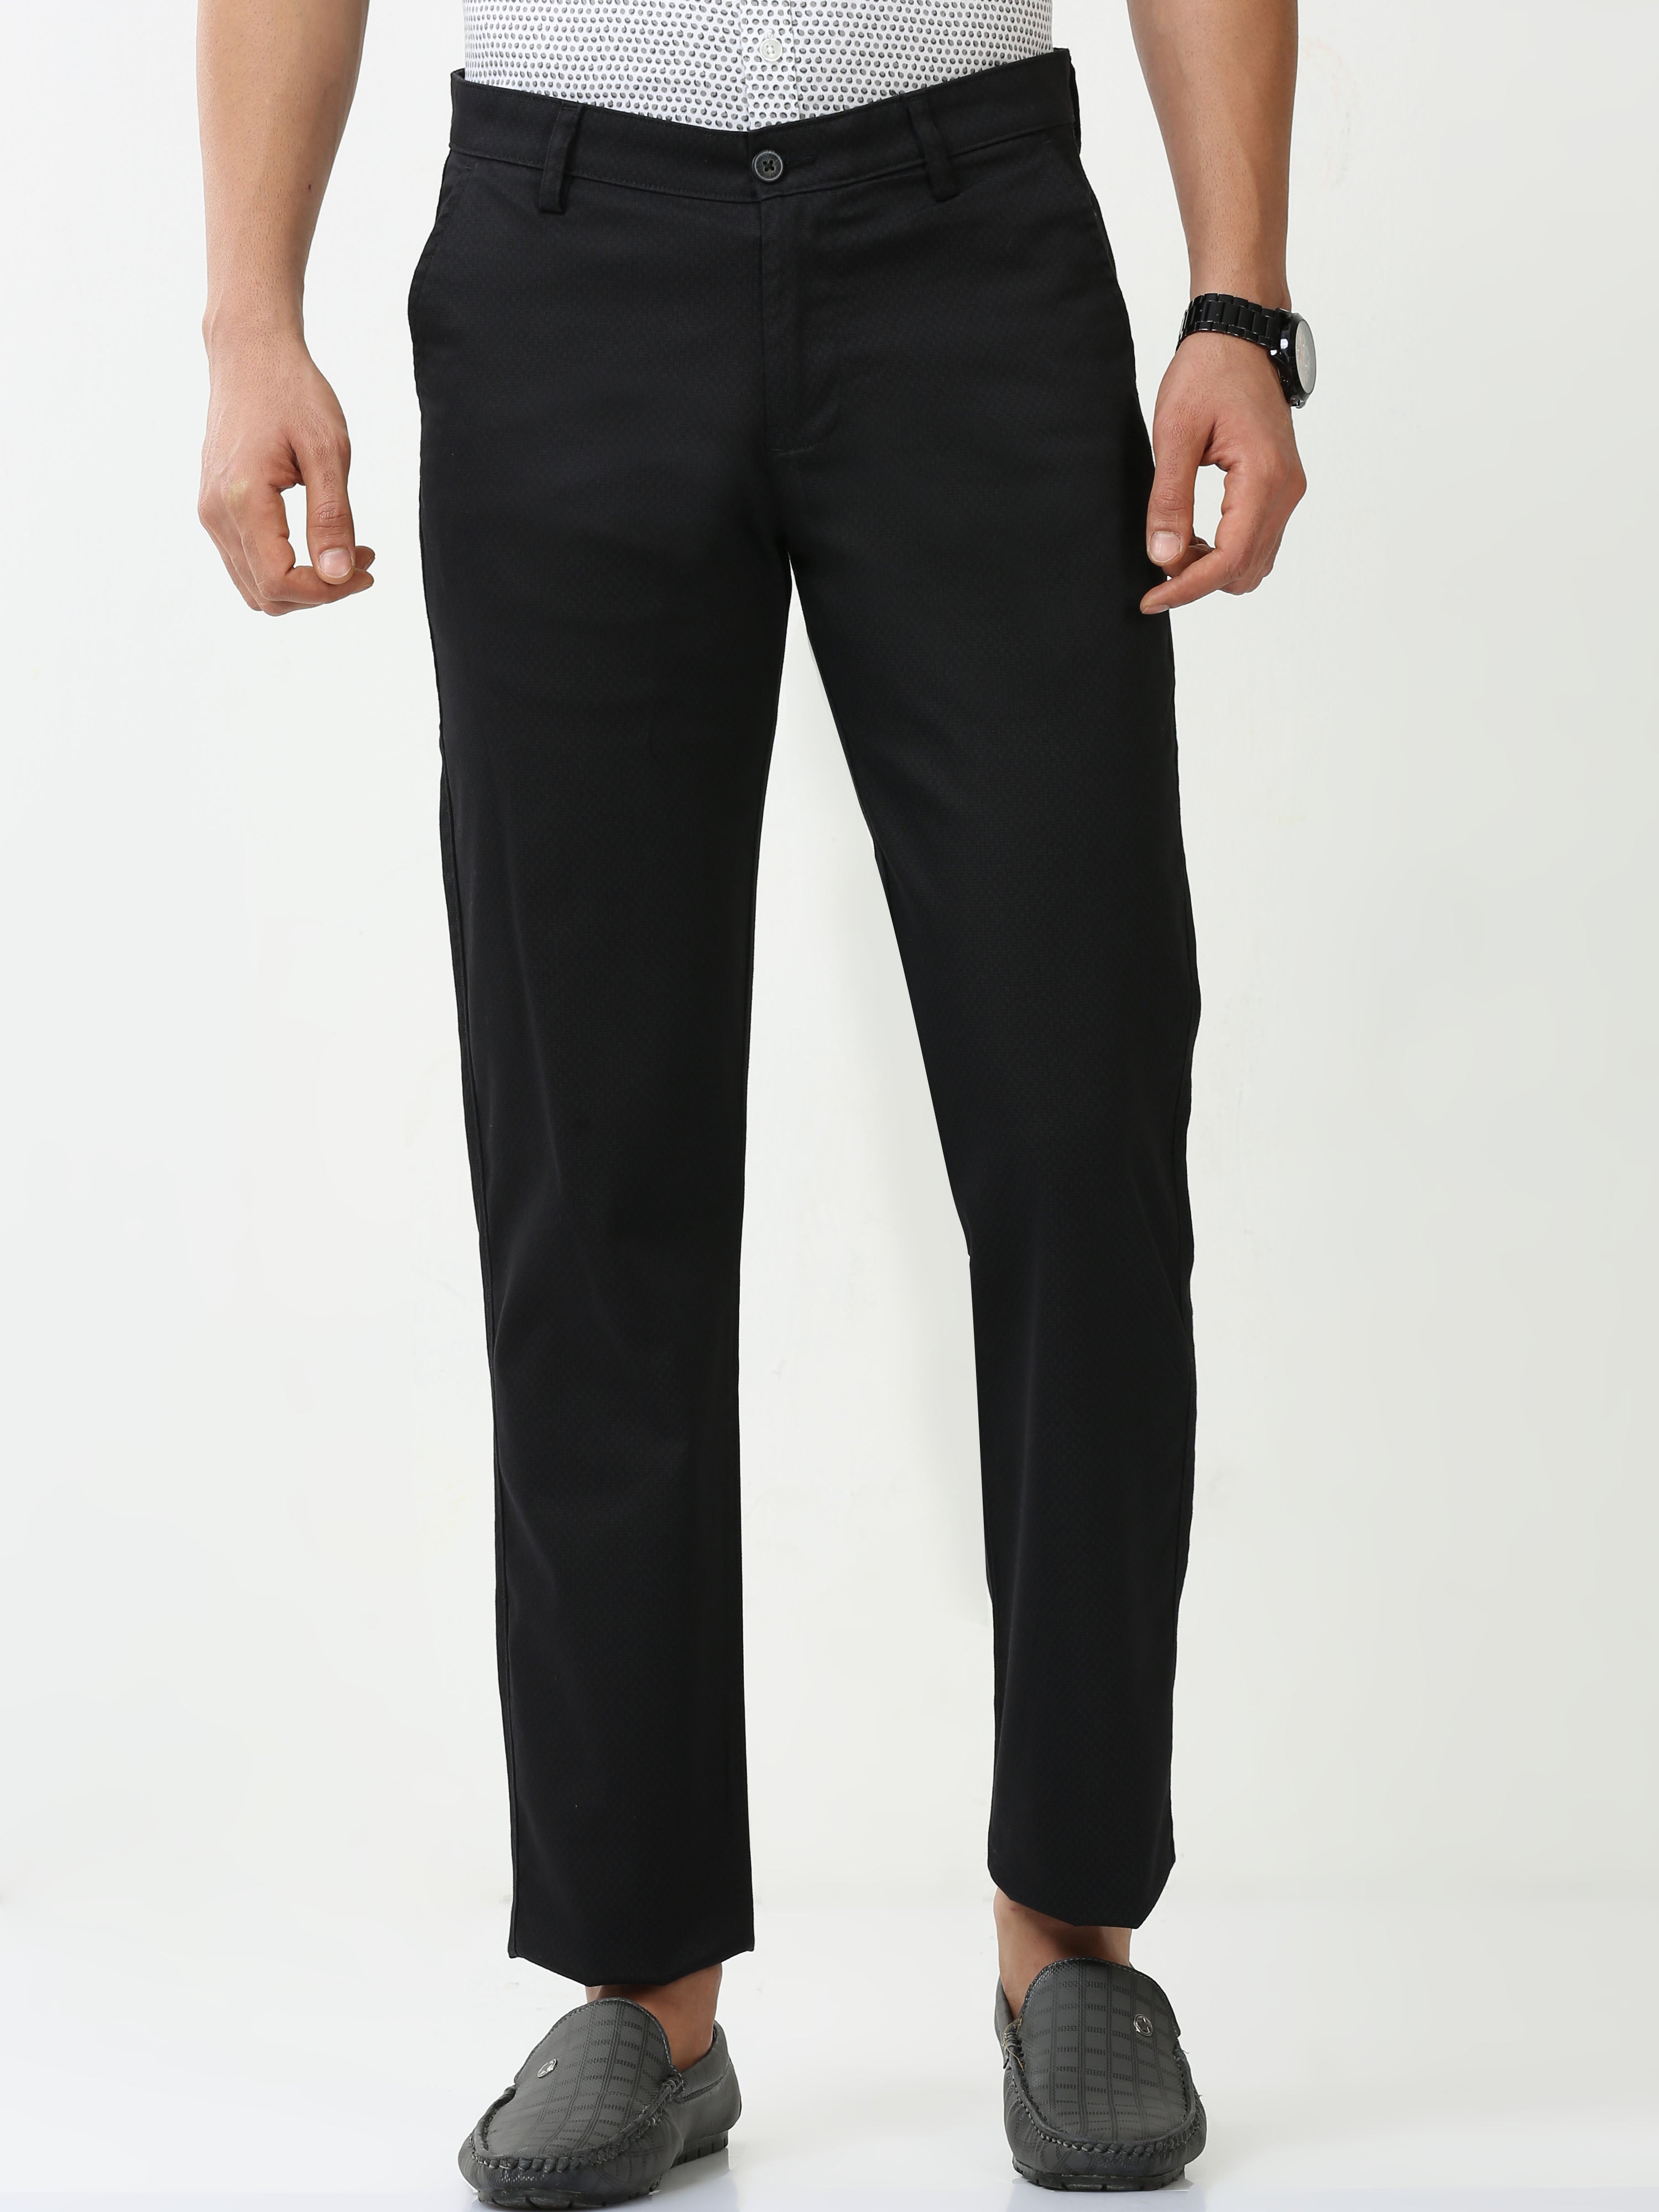 Trousers for Men  Formal, Casual, Joggers, Chinos & More